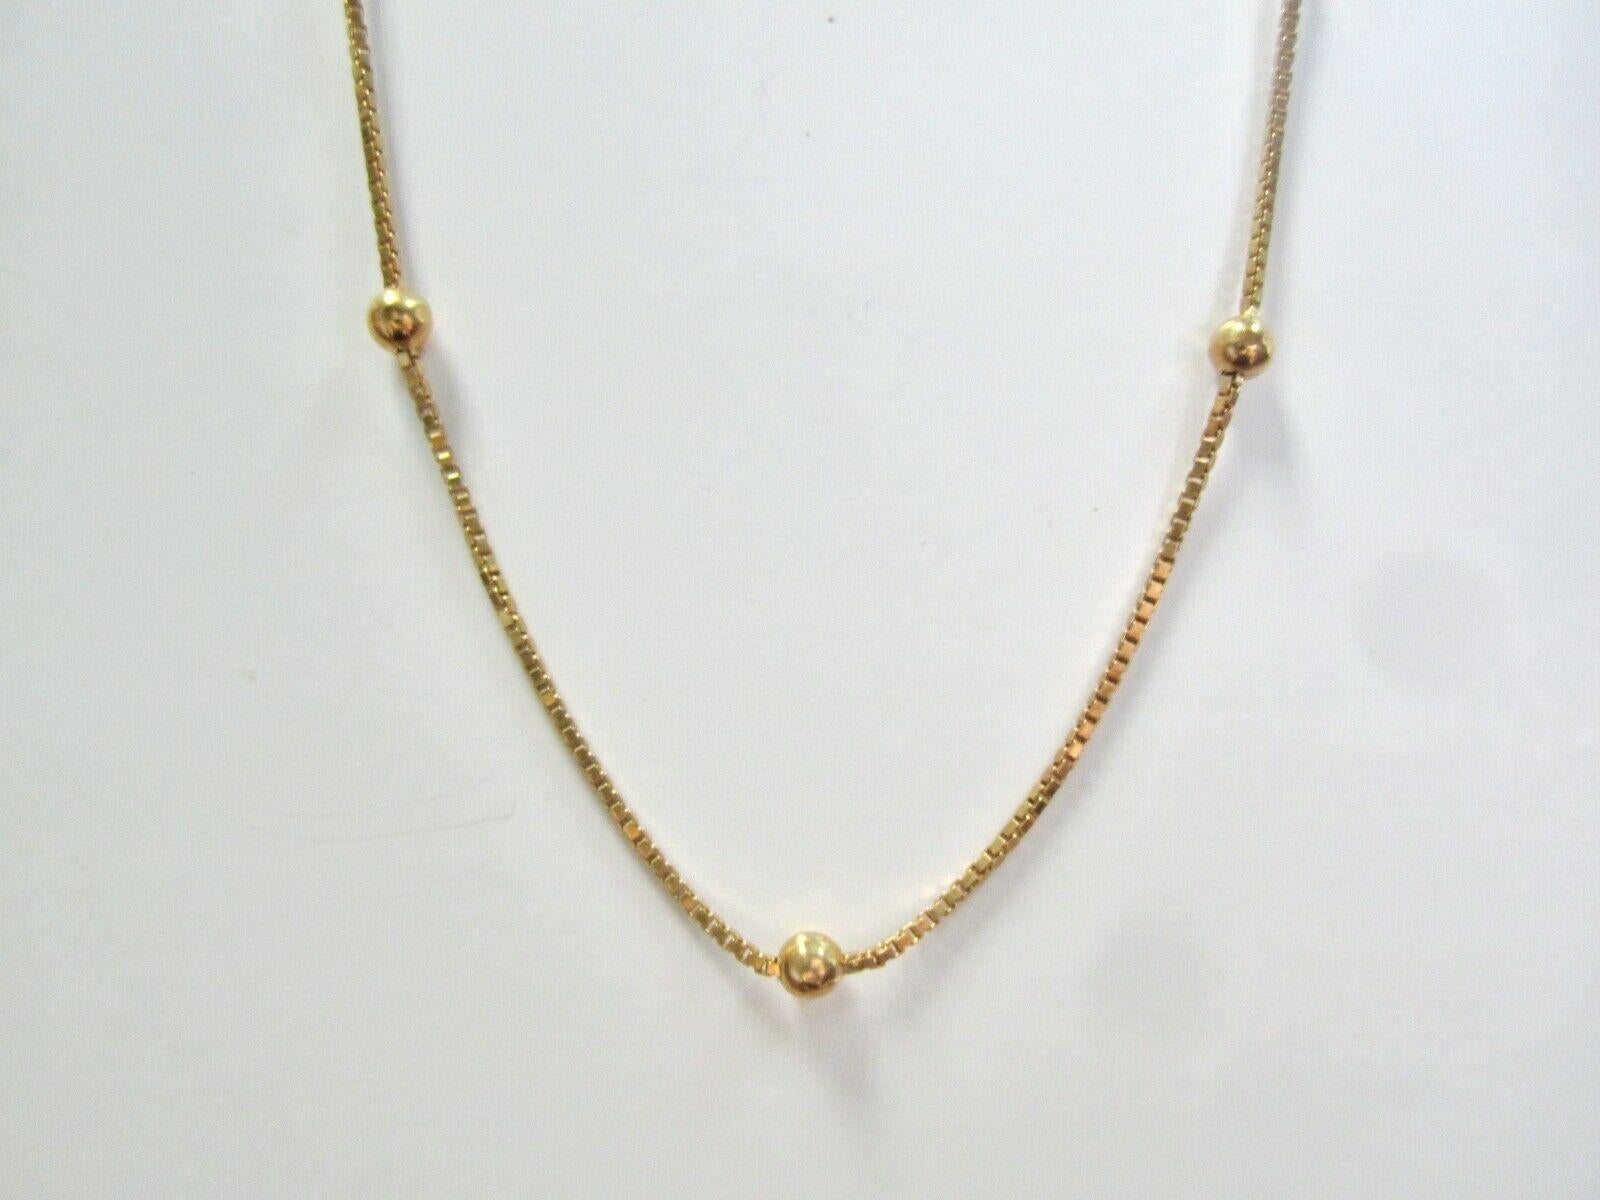 Women's or Men's Vintage 18 Karat Yellow Gold Box Chain Ball Necklace For Sale